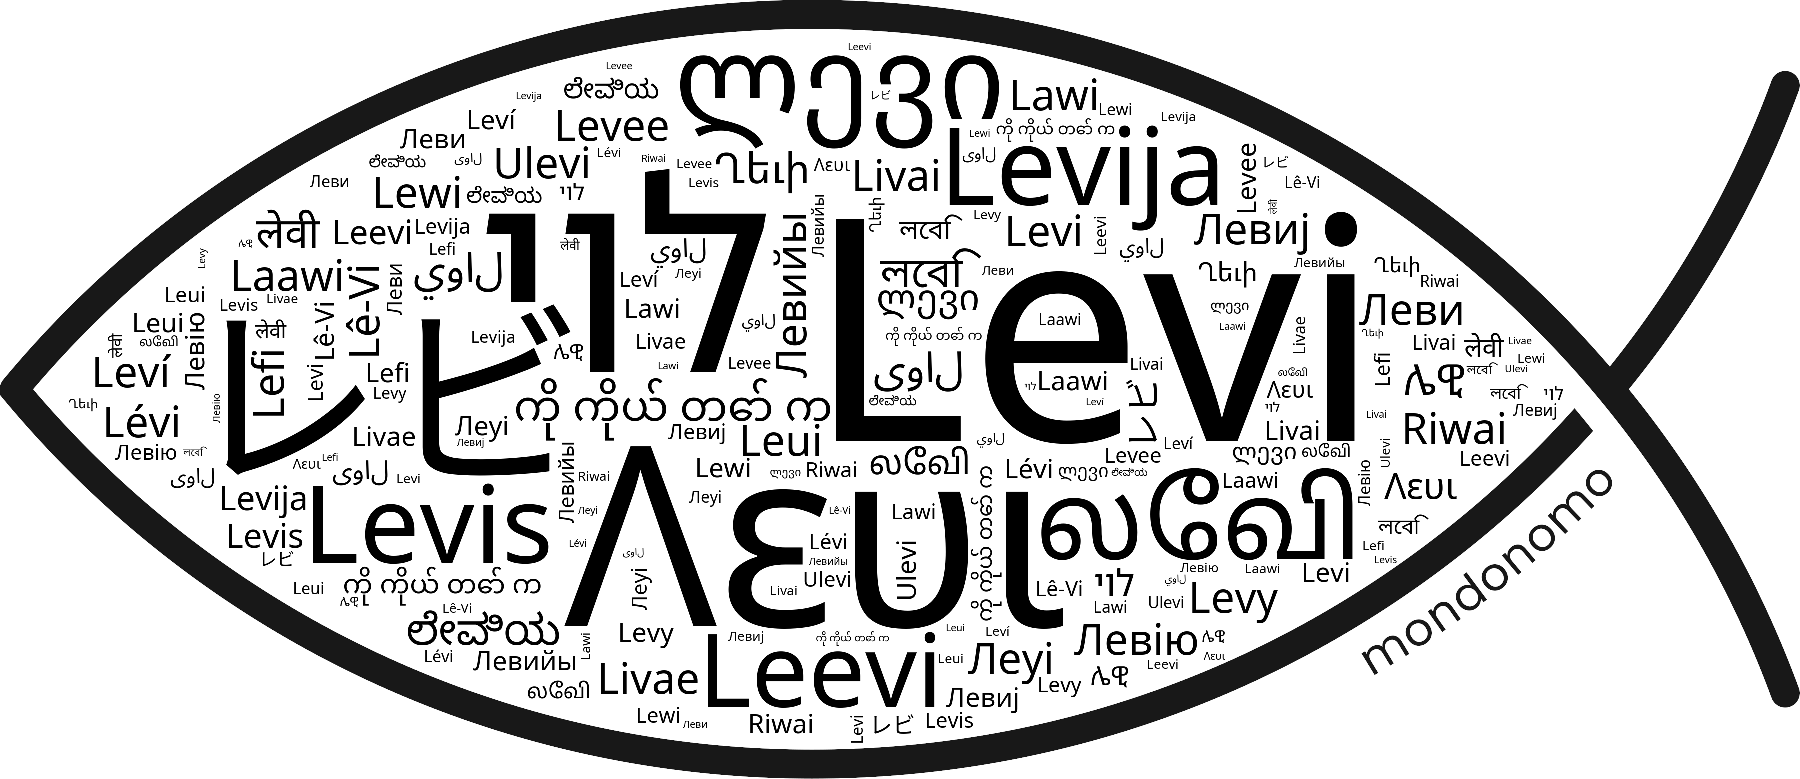 Name Levi in the world's Bibles